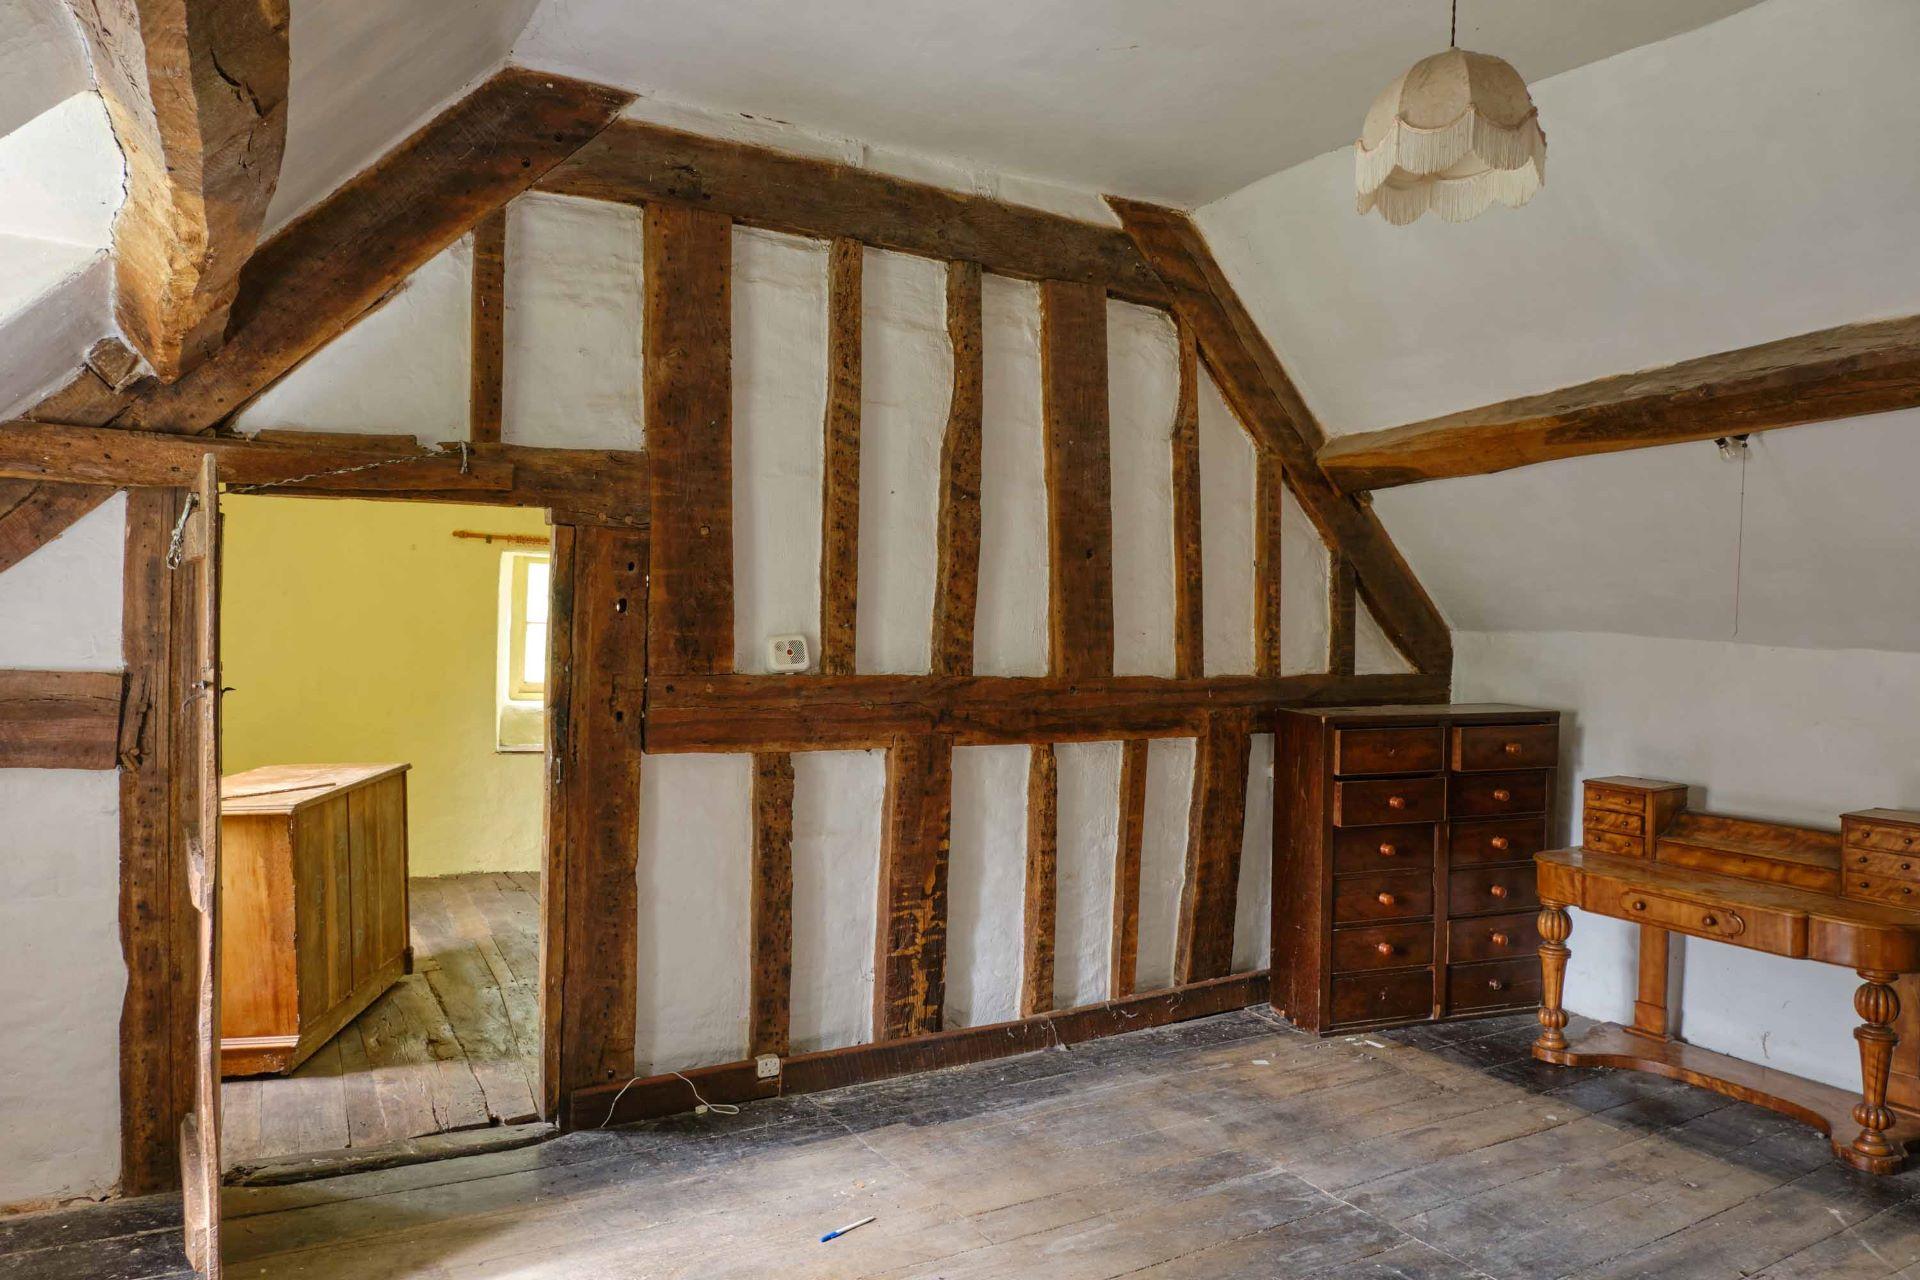 Listed building - Peny y Graig farmhouse - internal room showing timber beams